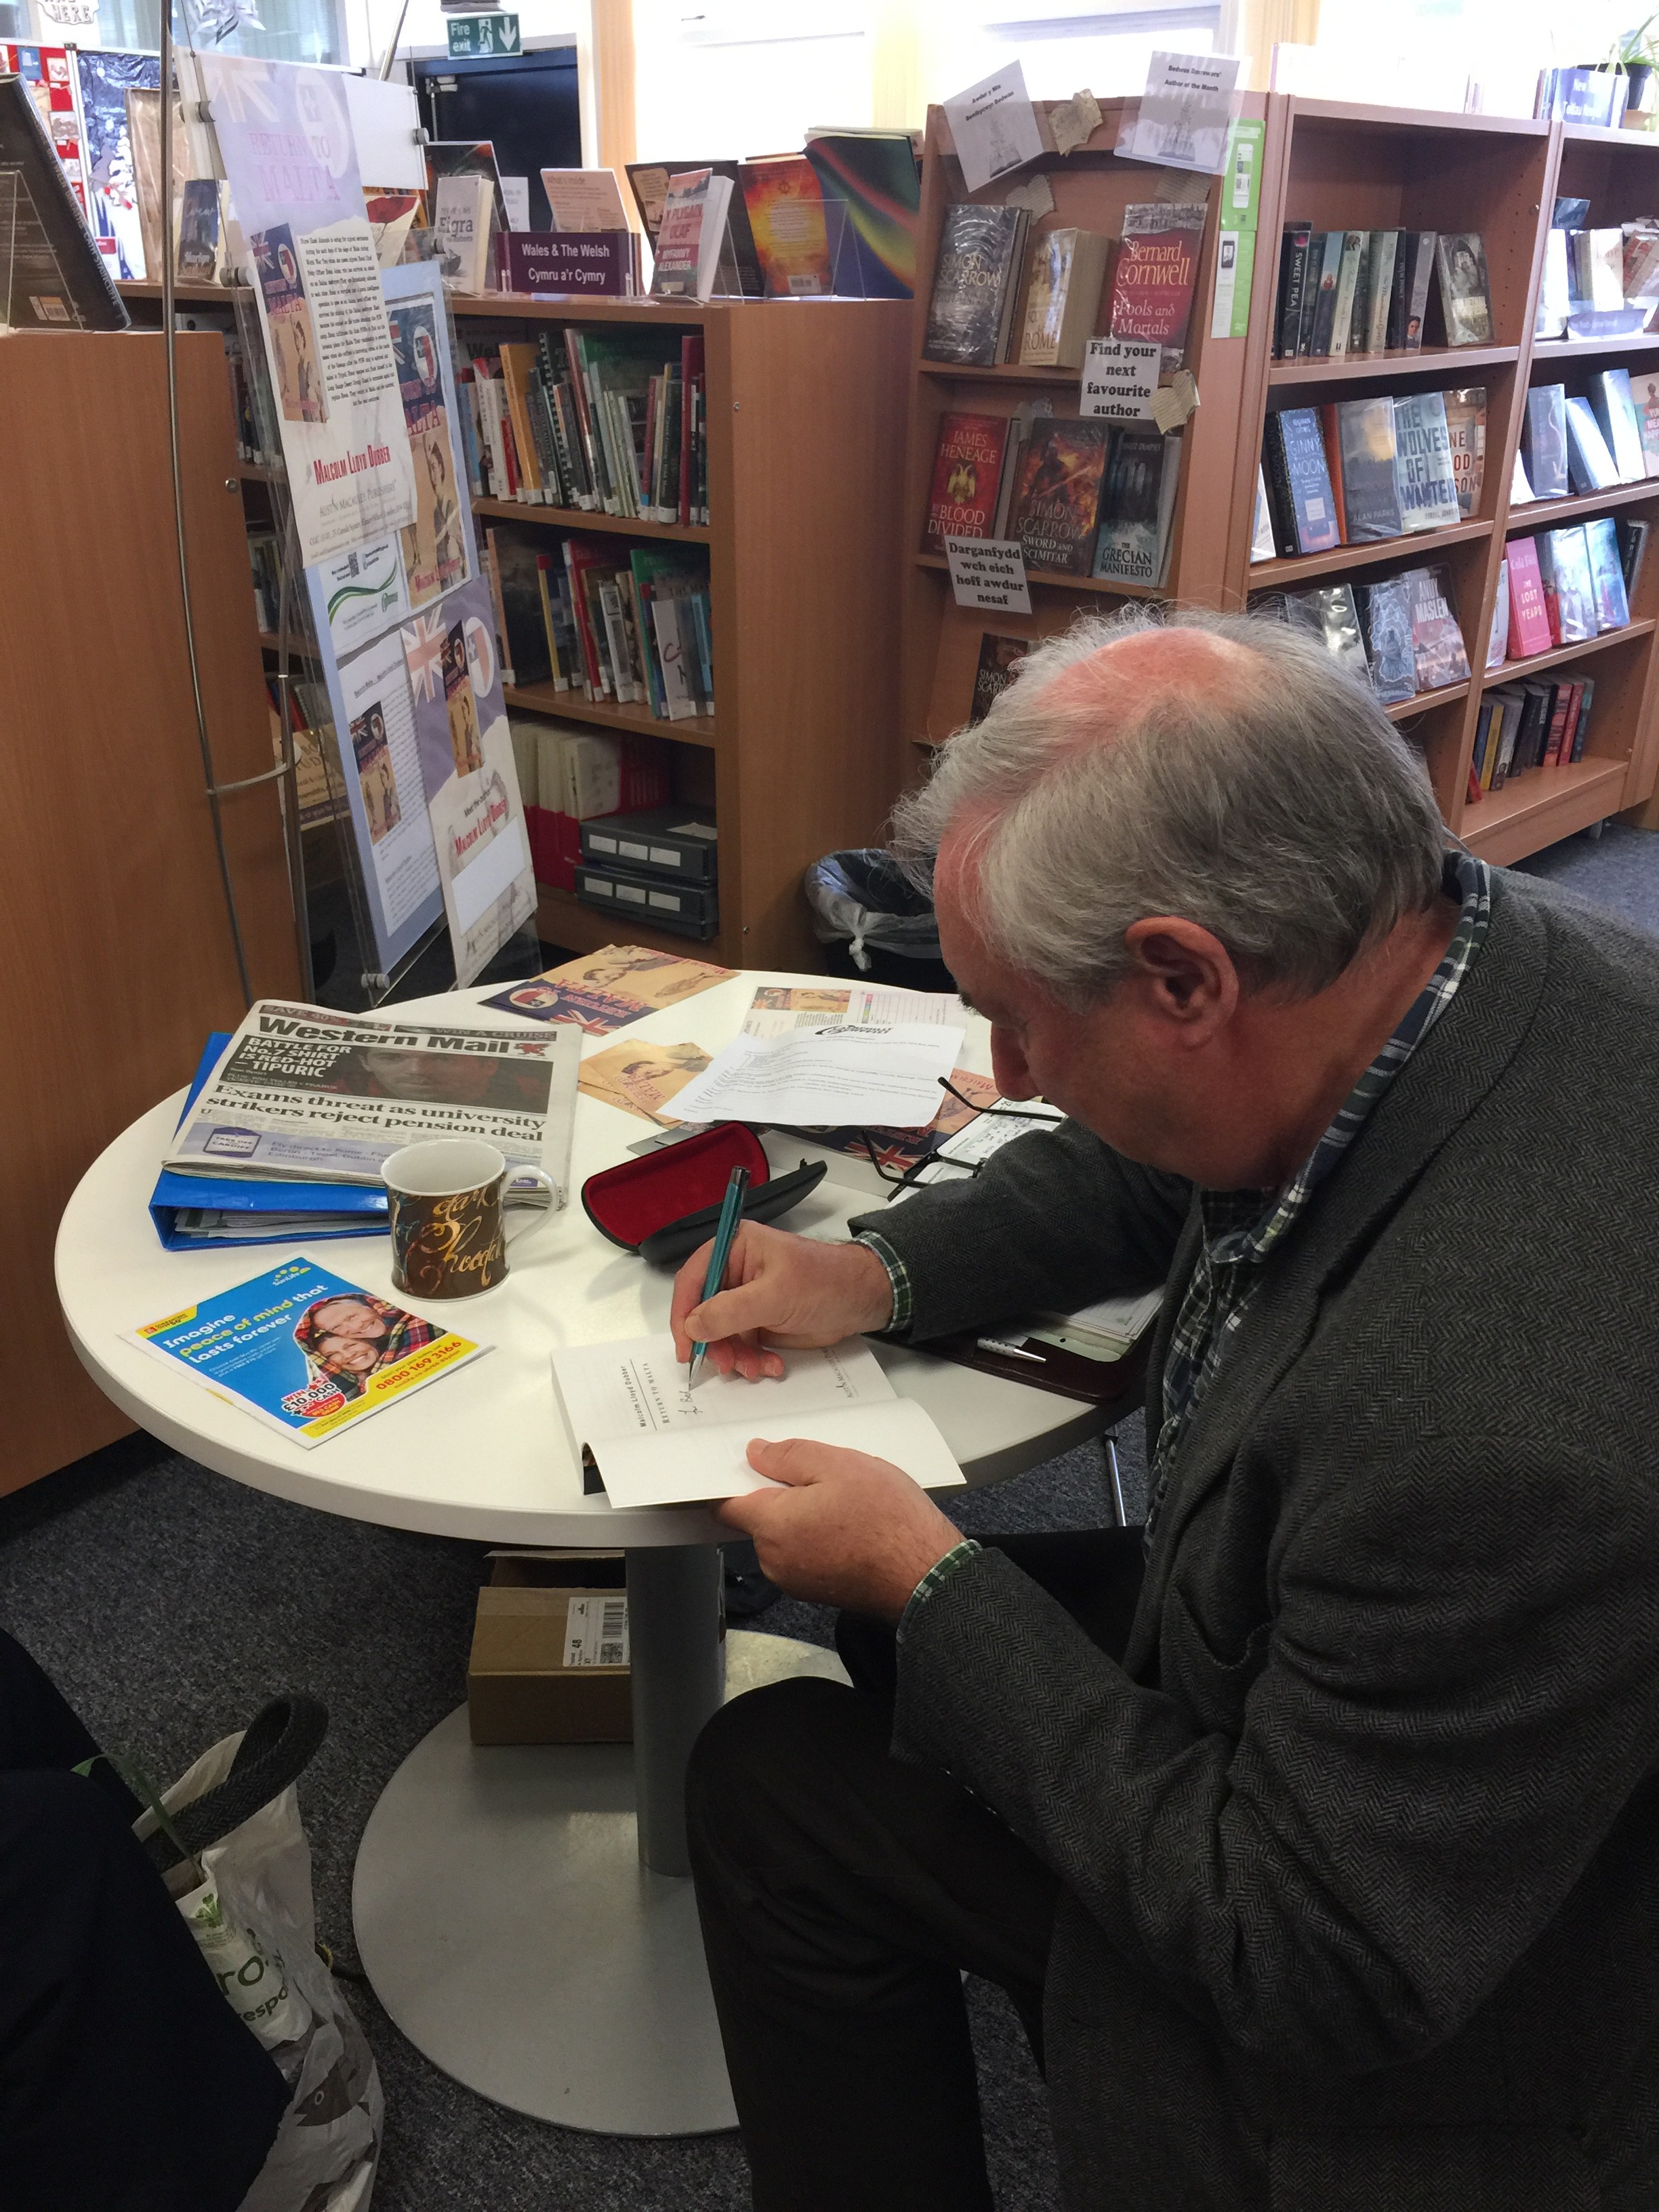 Malcolm Lloyd Dubber visited the Bedwas Library for a Book Signing